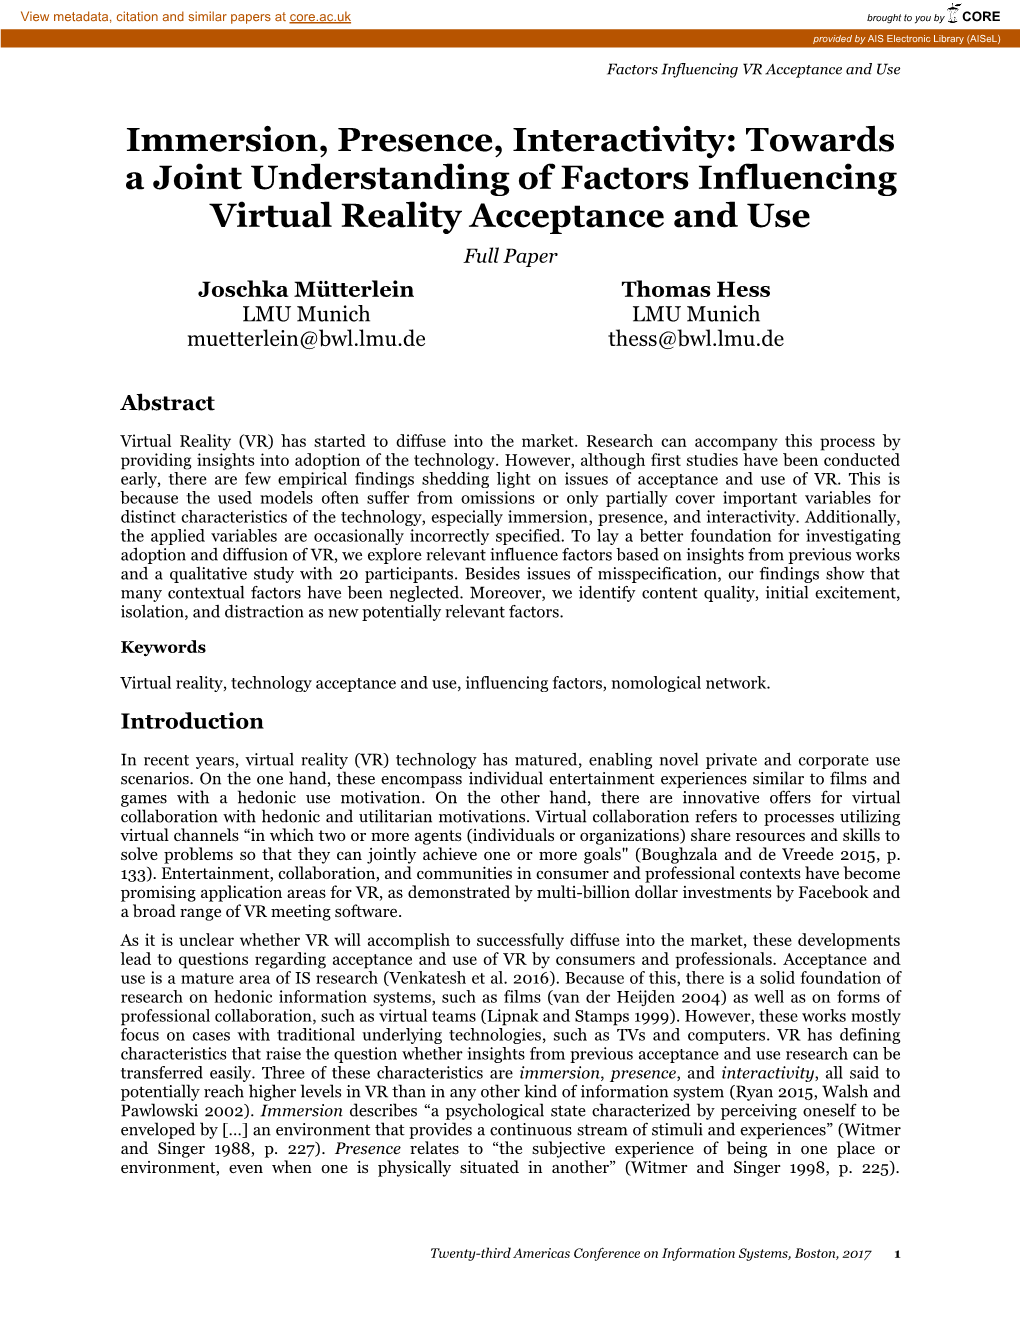 Immersion, Presence, Interactivity: Towards a Joint Understanding of Factors Influencing Virtual Reality Acceptance And